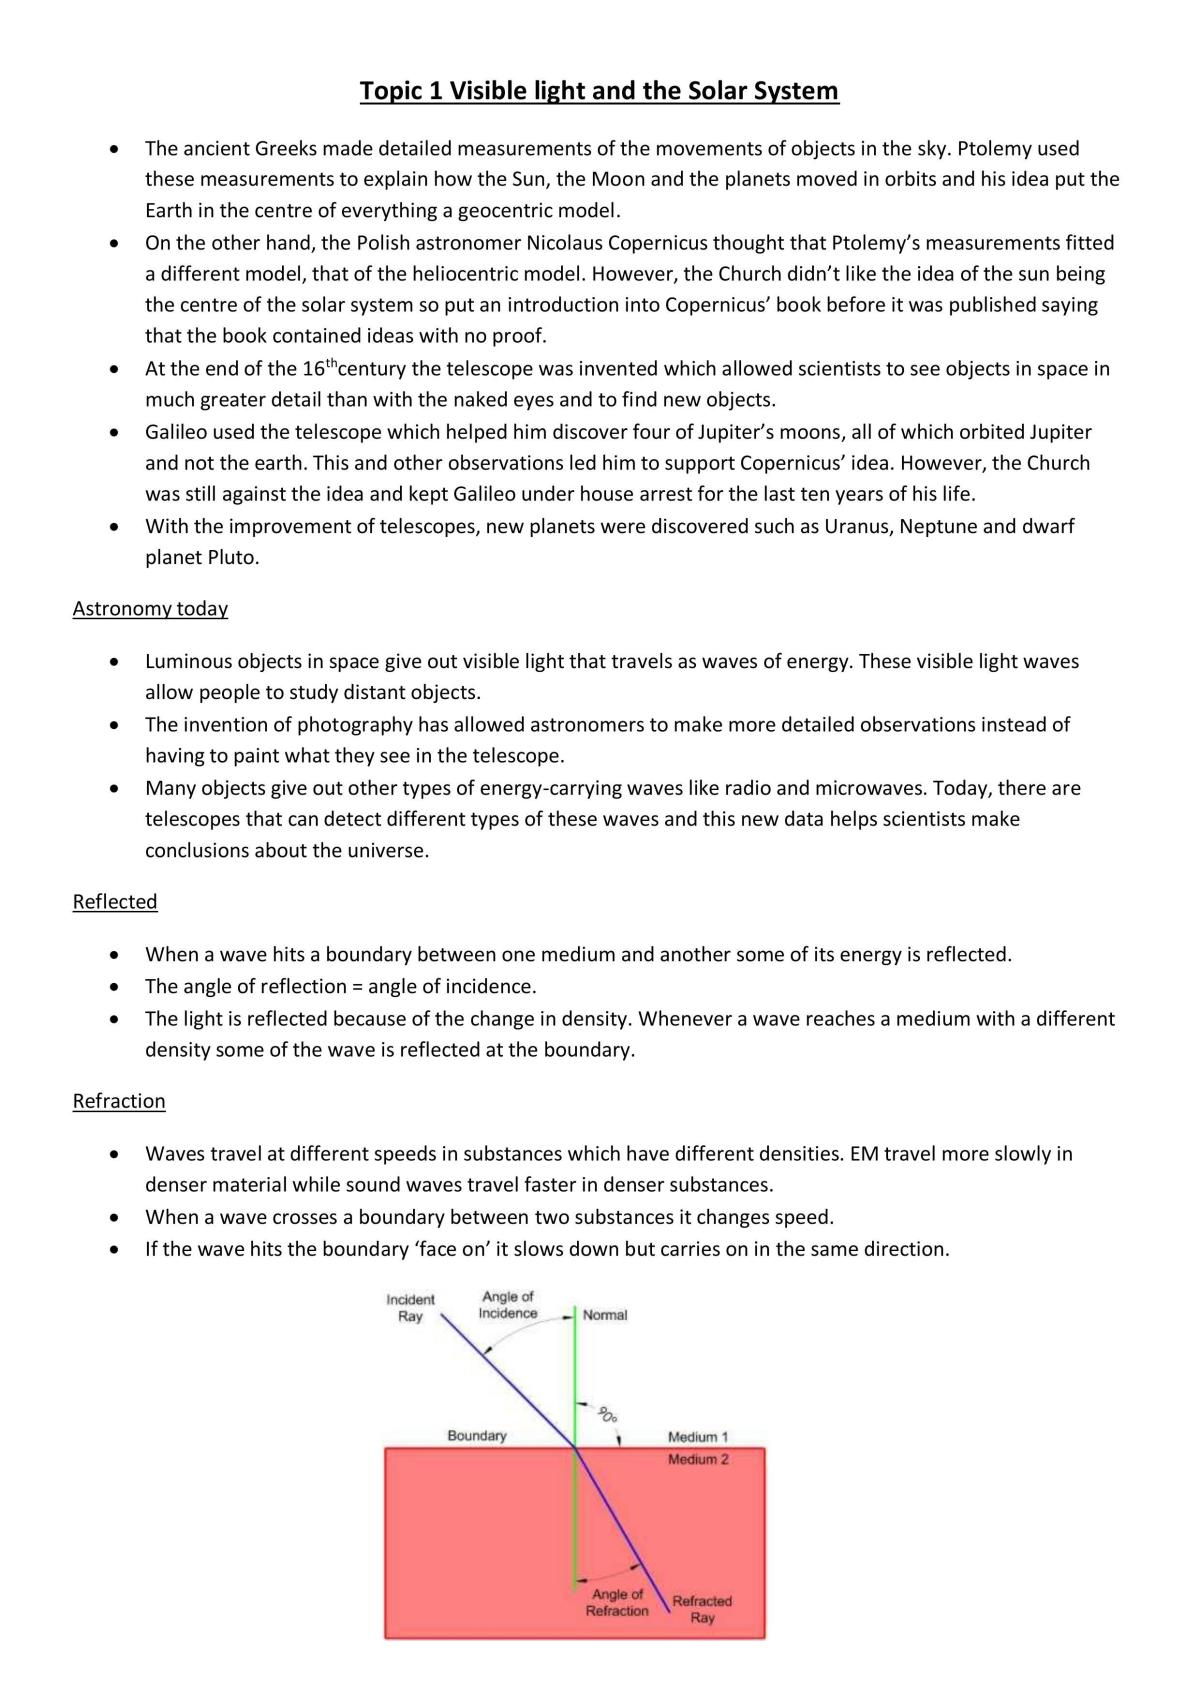 Physics notes for Edexcel GCSE - Page 1